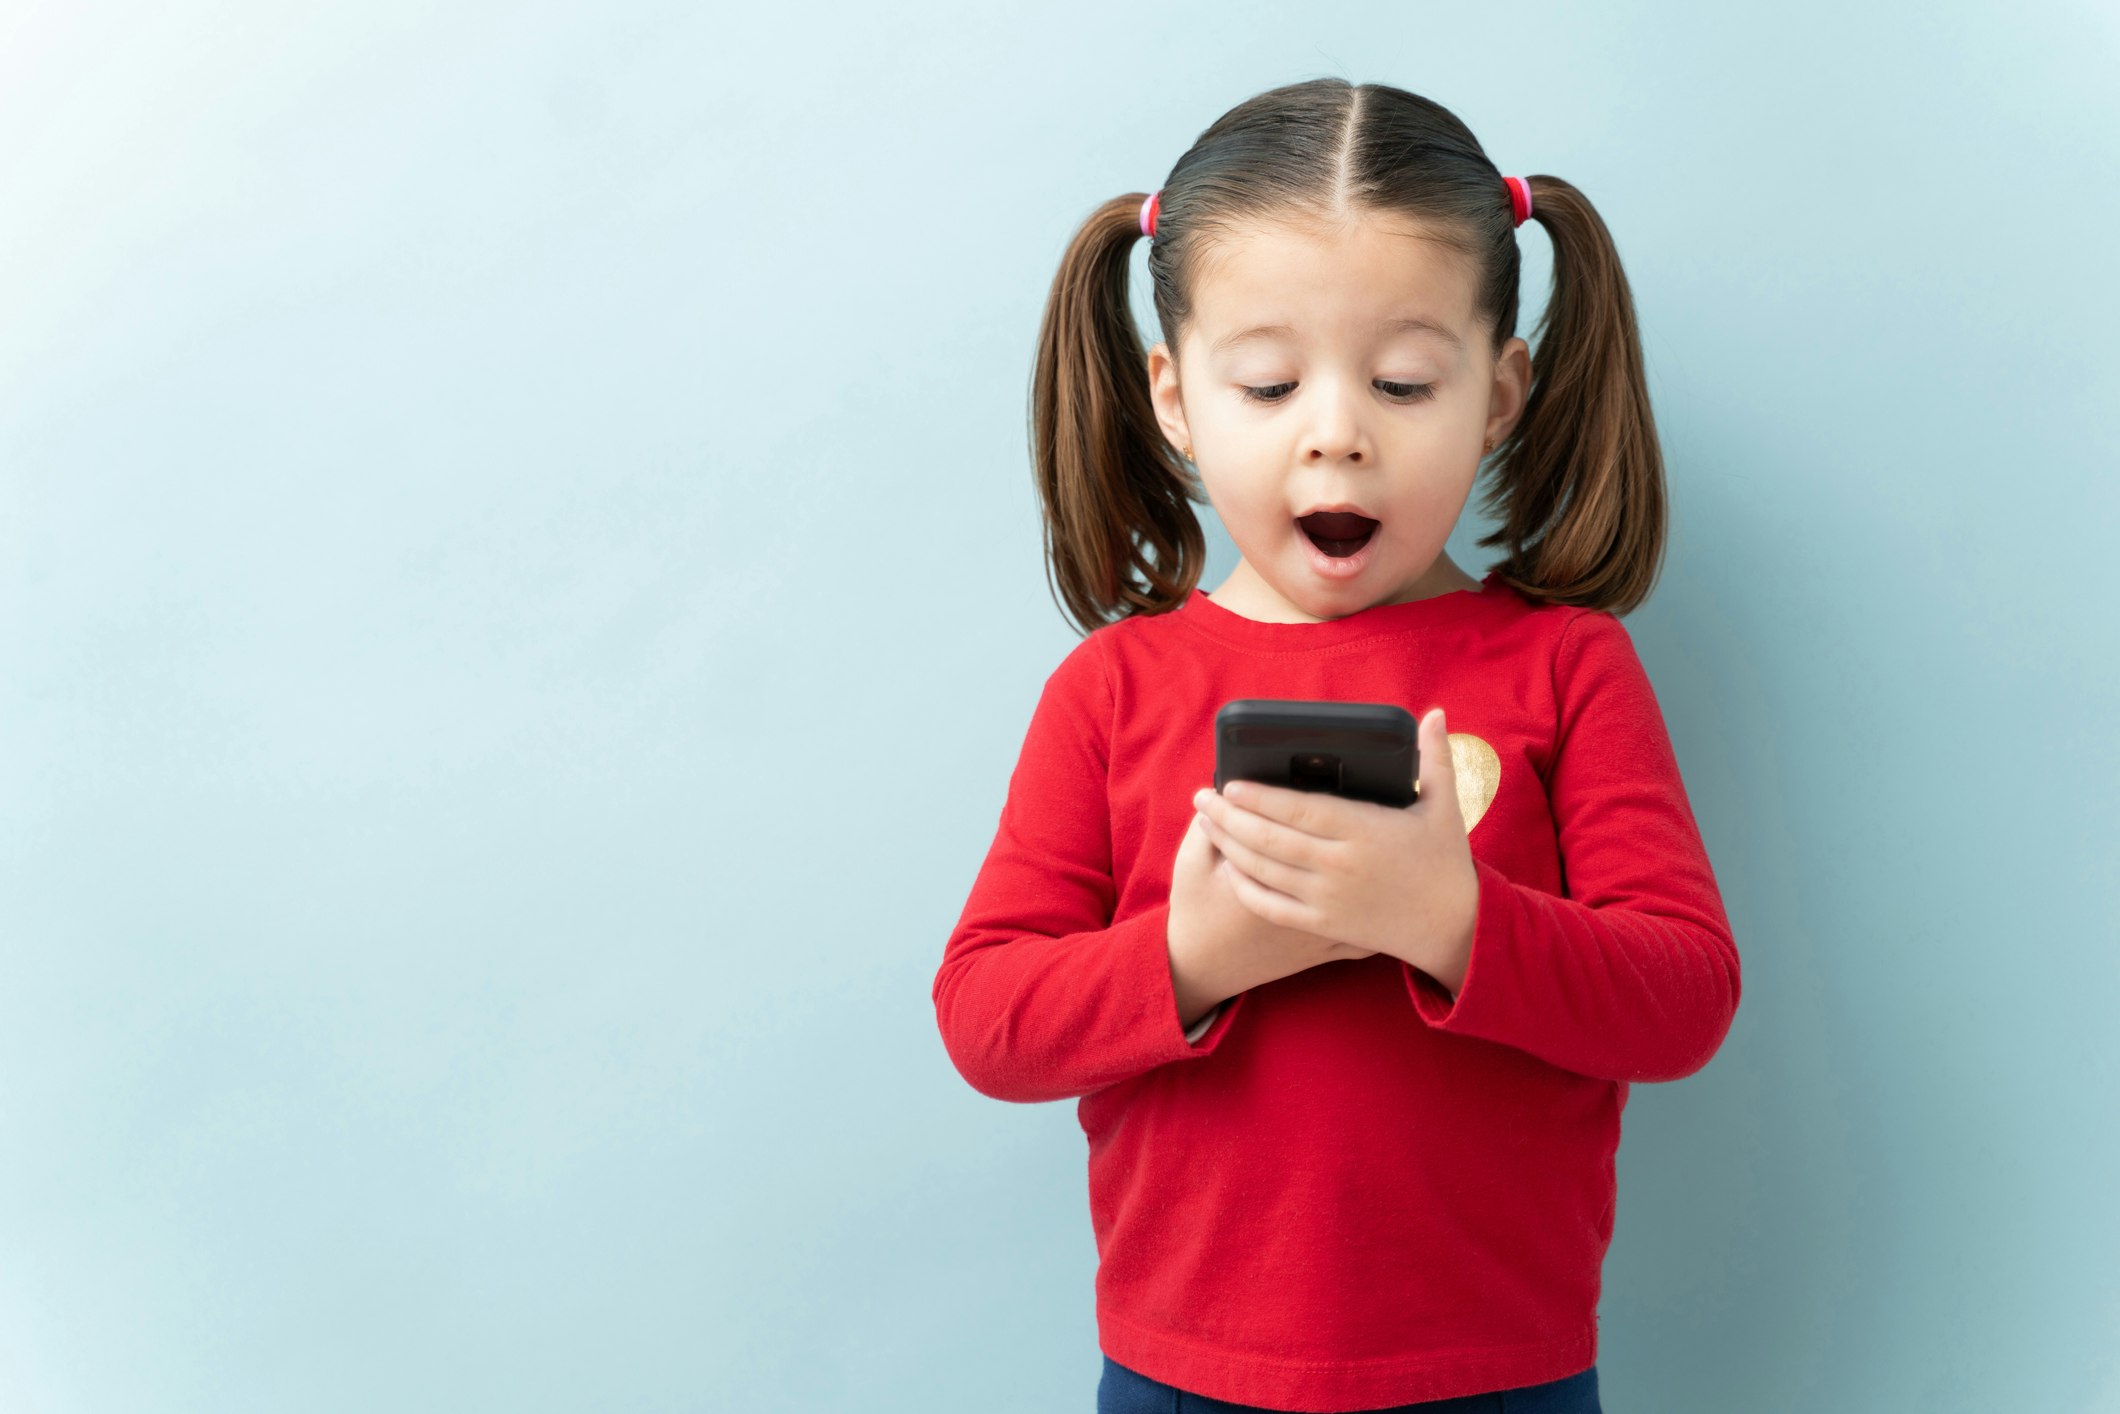 little girl holding a smartphone and looking surprised with her mouth open